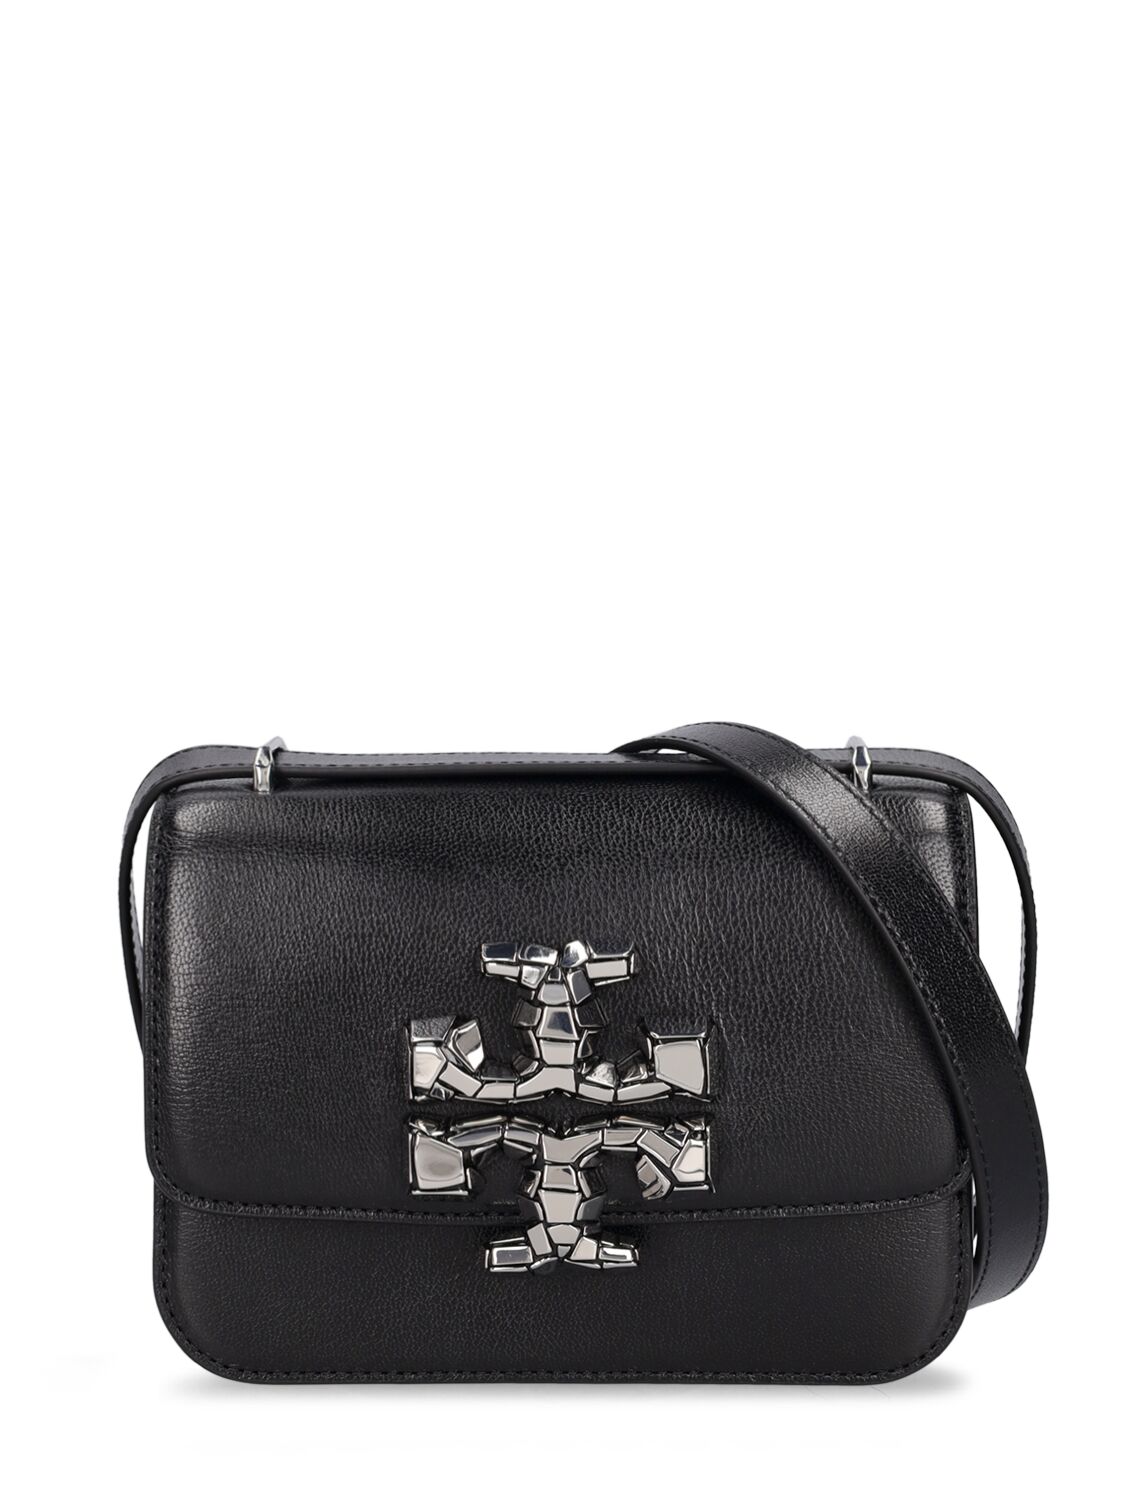 Tory Burch Small Eleonor Distressed Leather Bag In Black